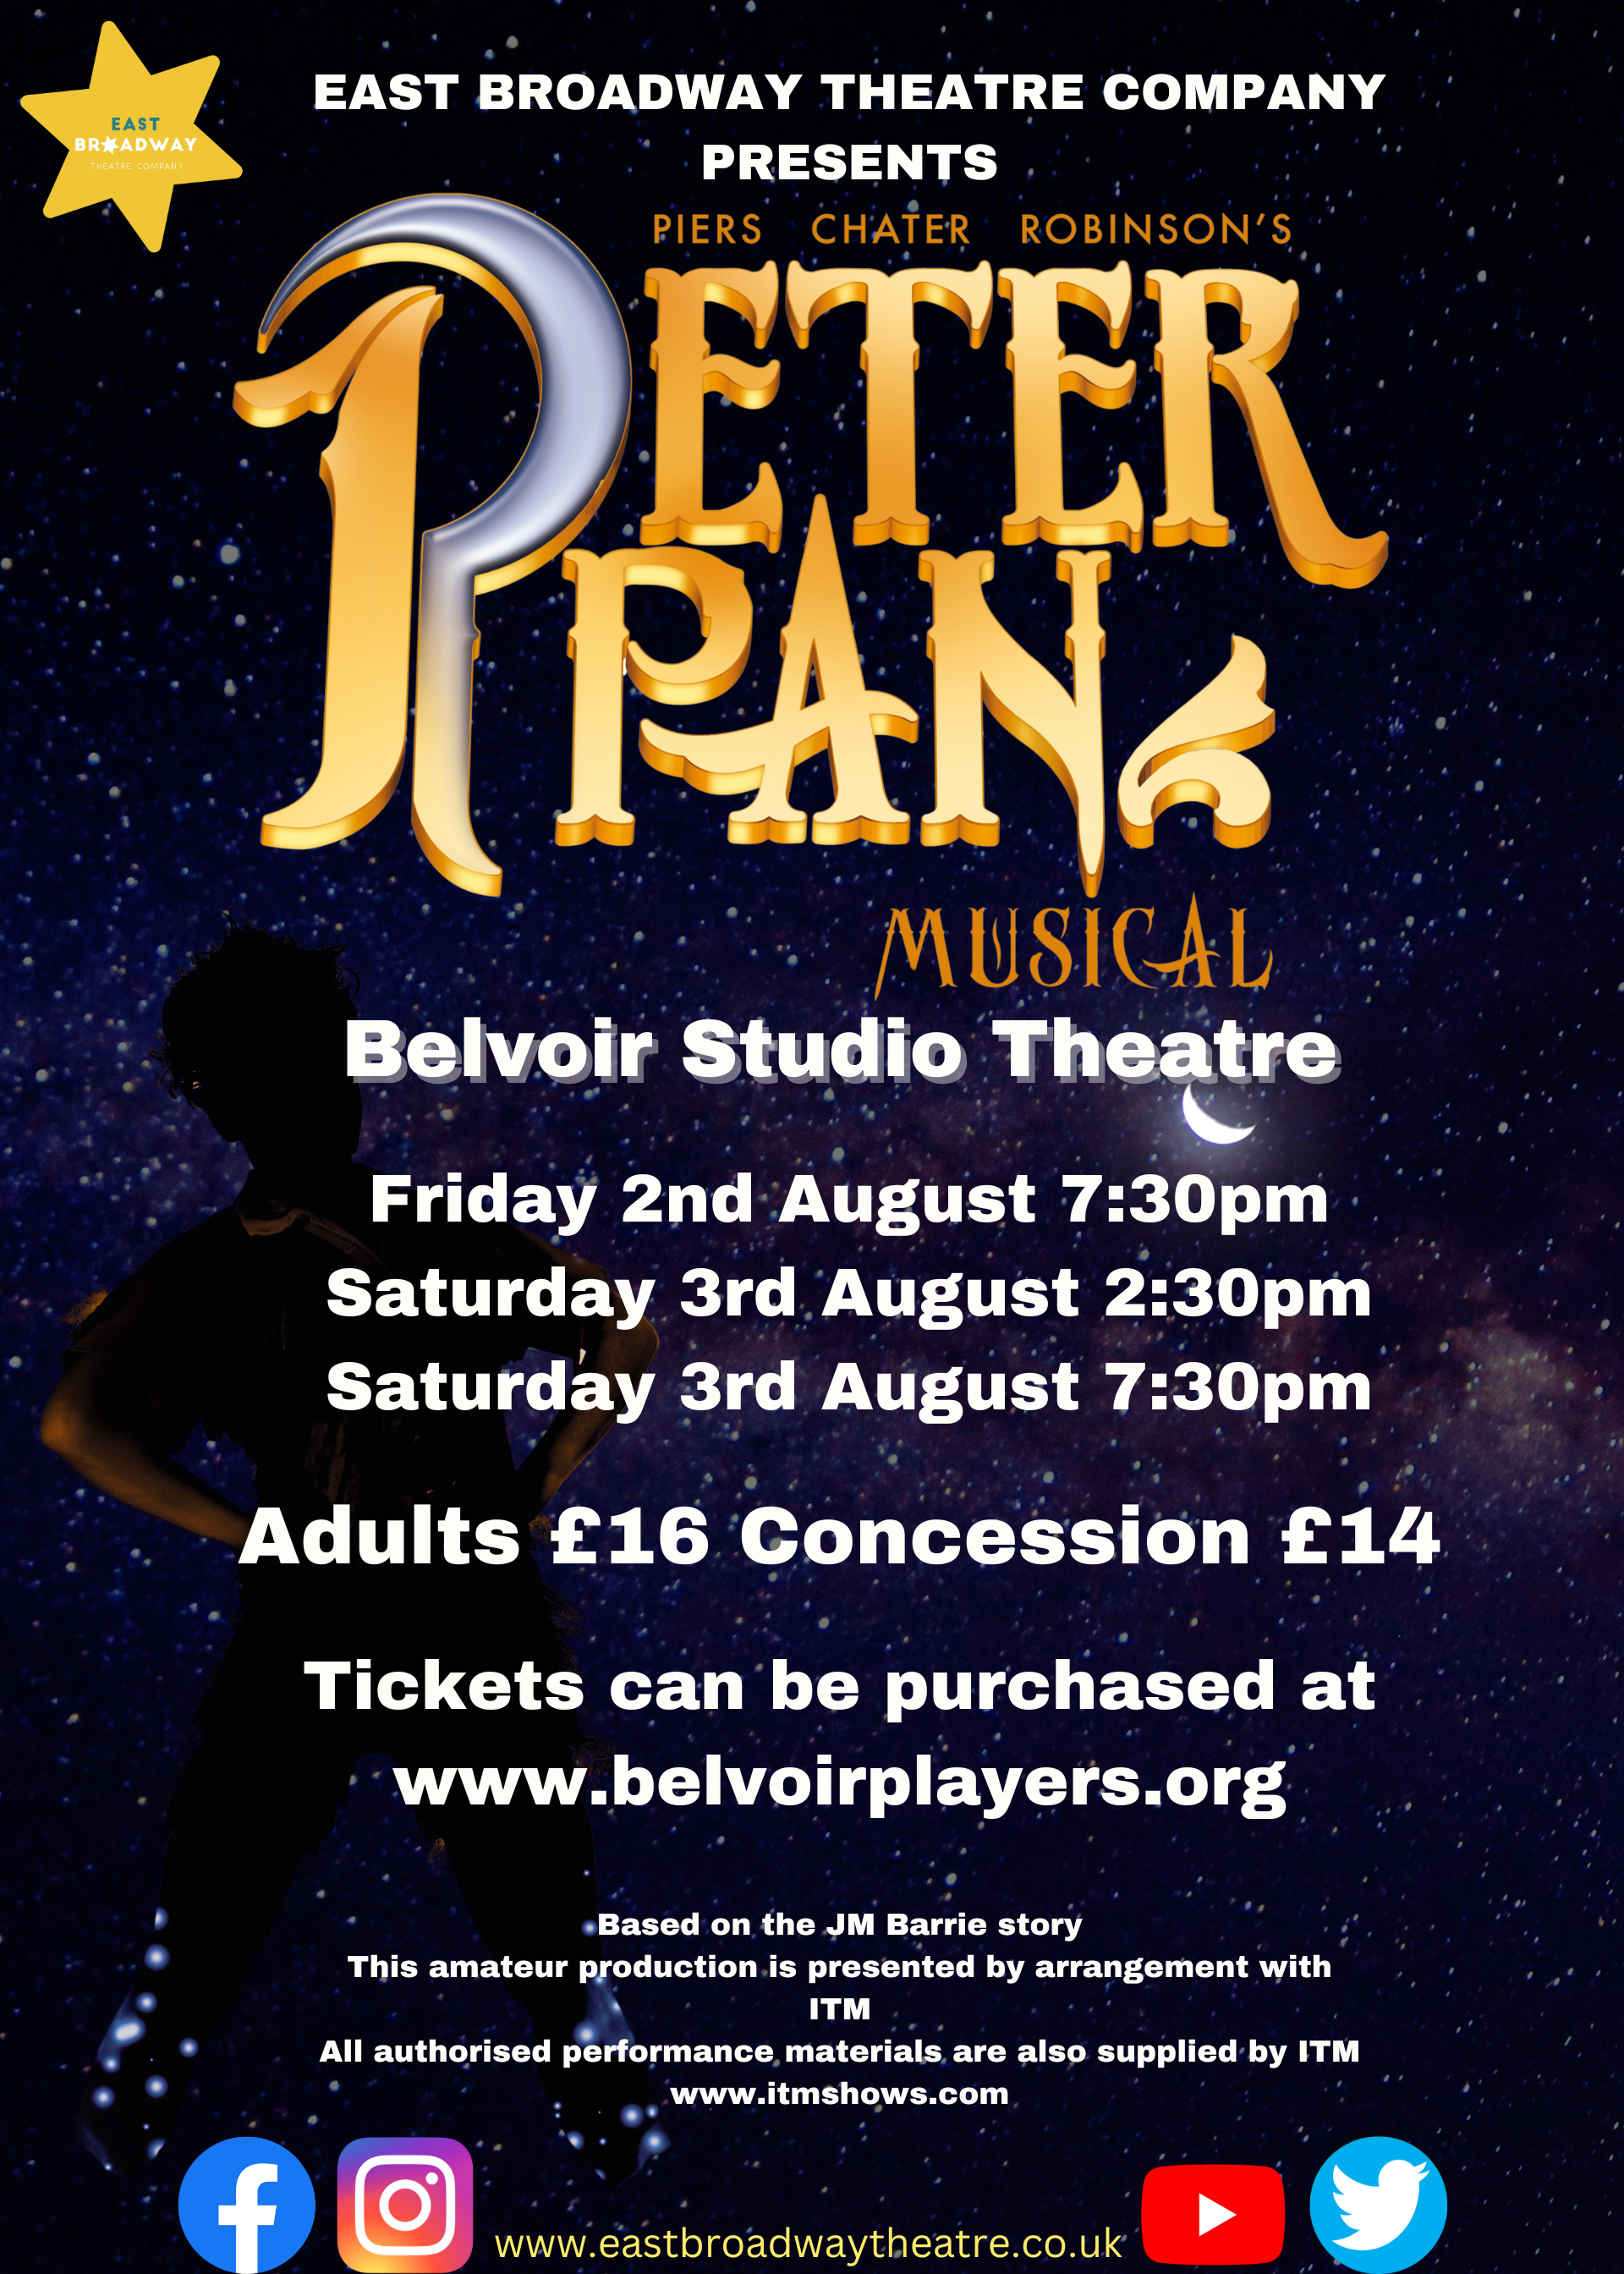 East Broadway Theatre Company - Peter Pan: The Musical